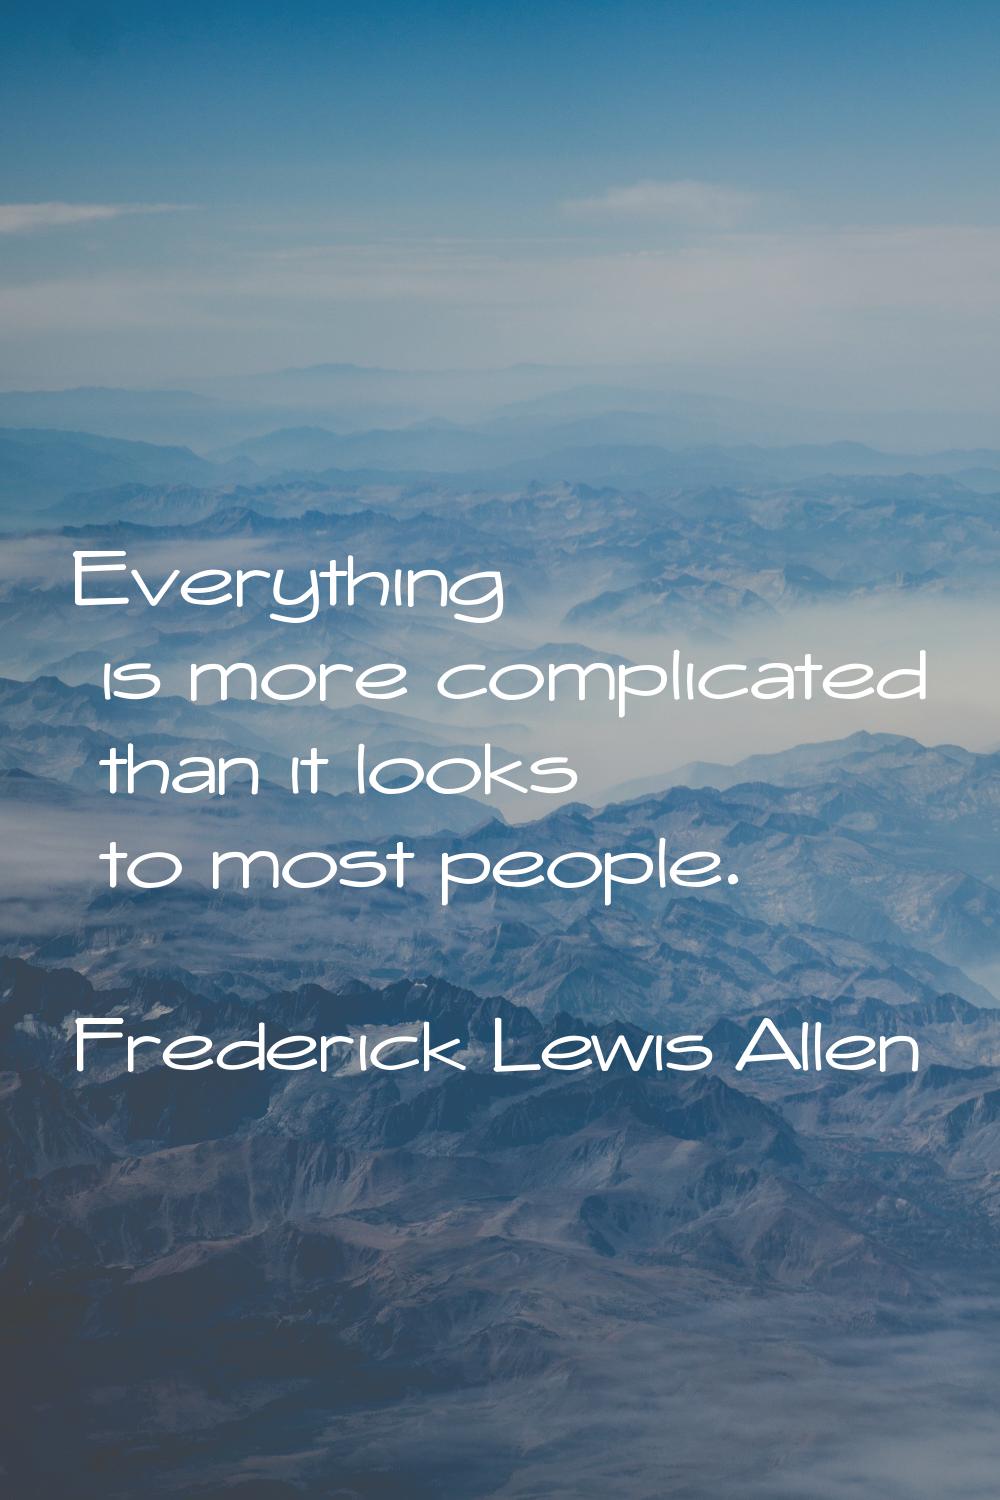 Everything is more complicated than it looks to most people.